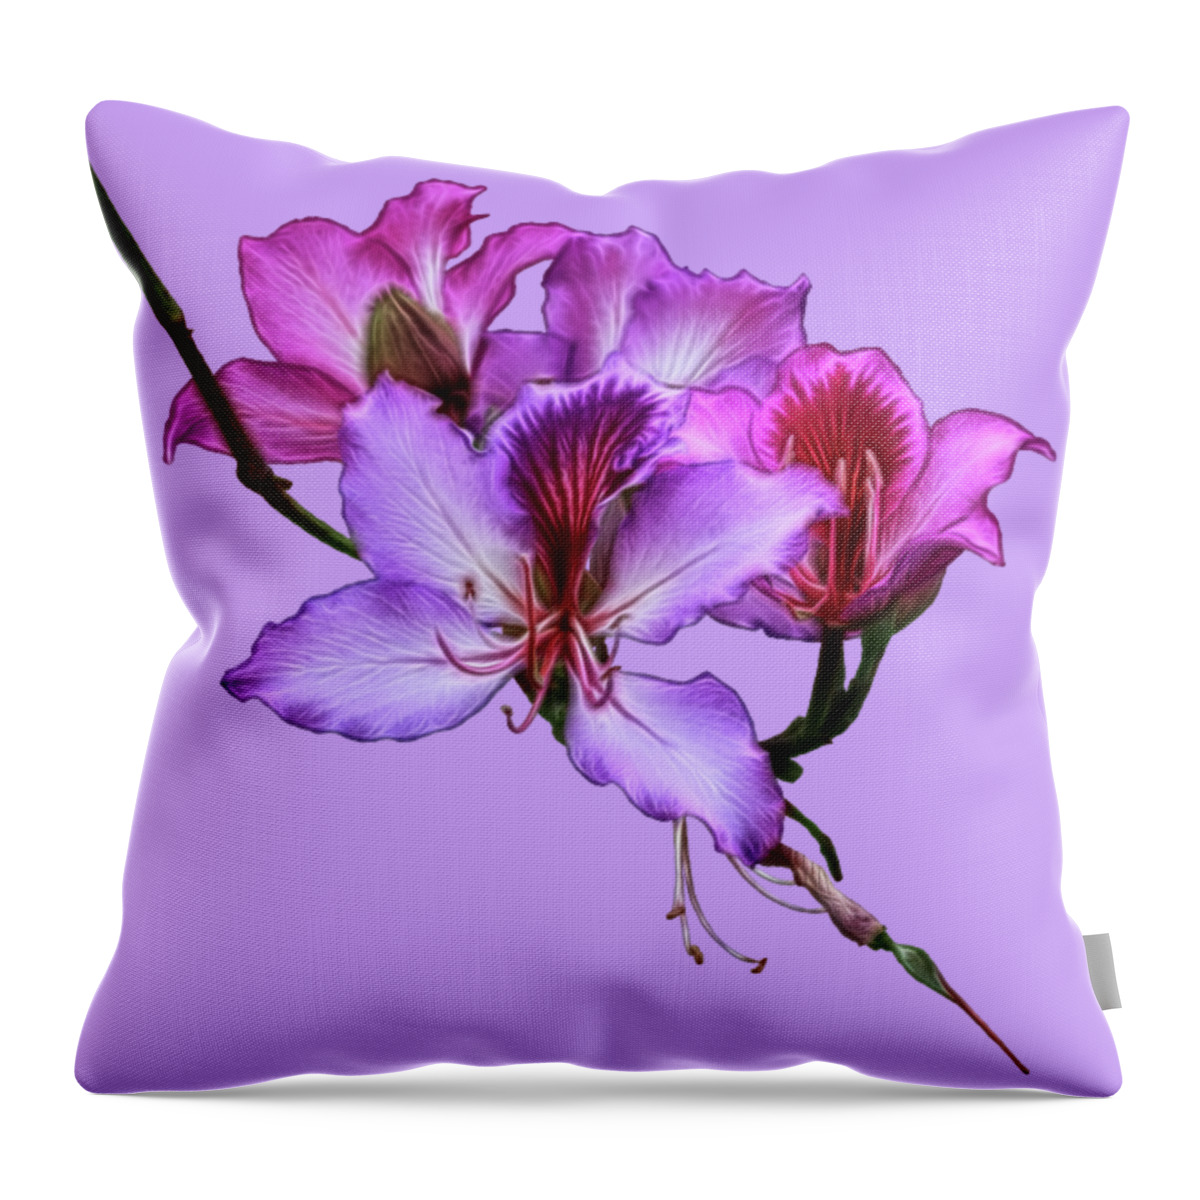 Orchid Throw Pillow featuring the photograph Purple Orchids by Shane Bechler